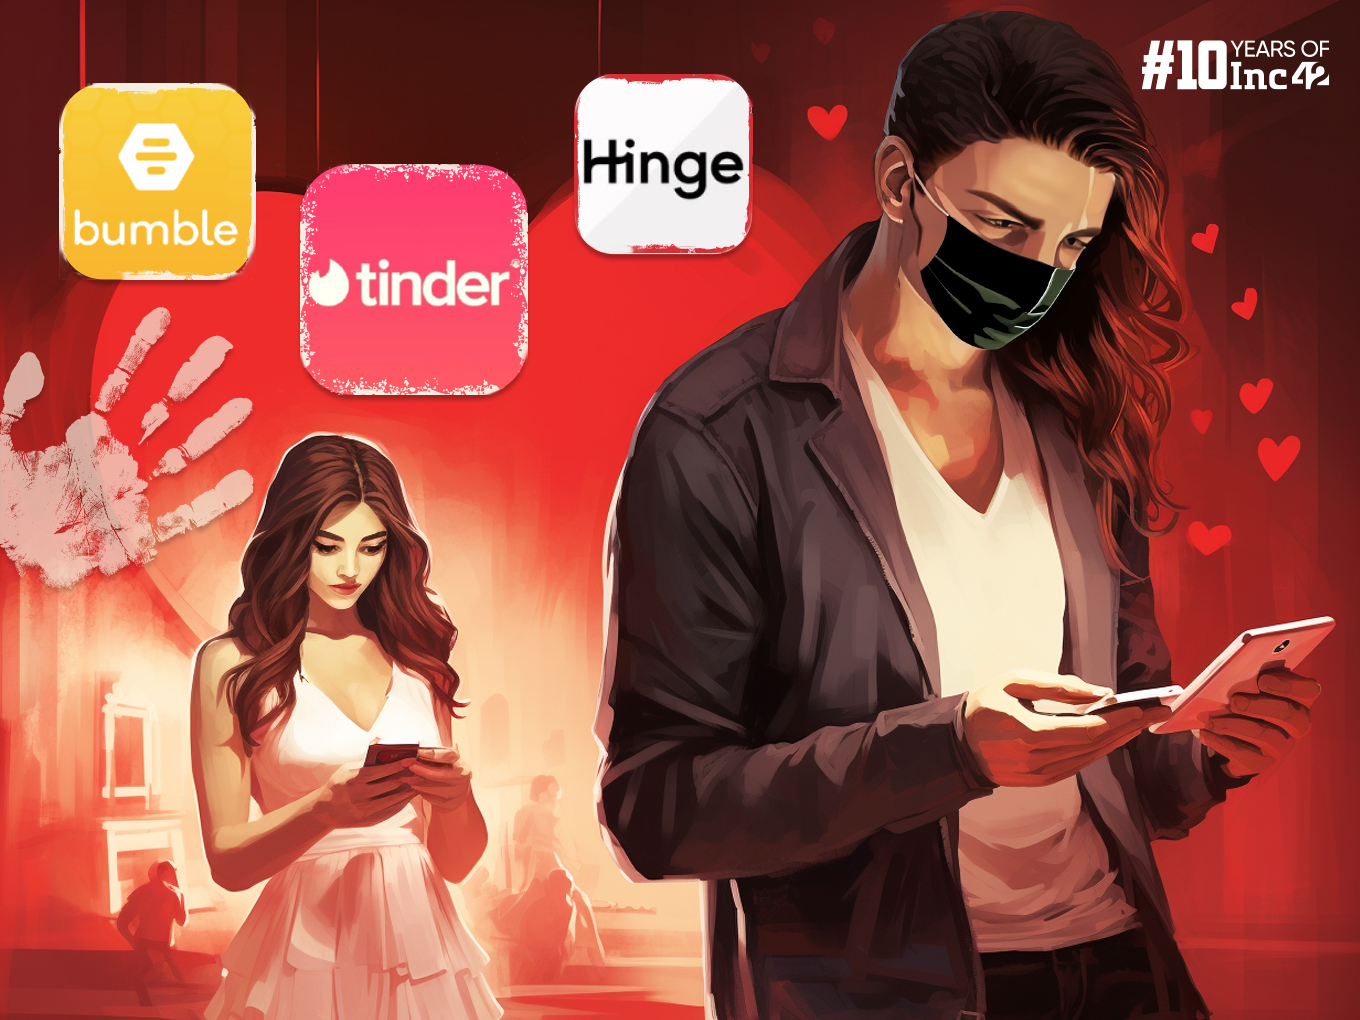 Legal challenges against dating apps